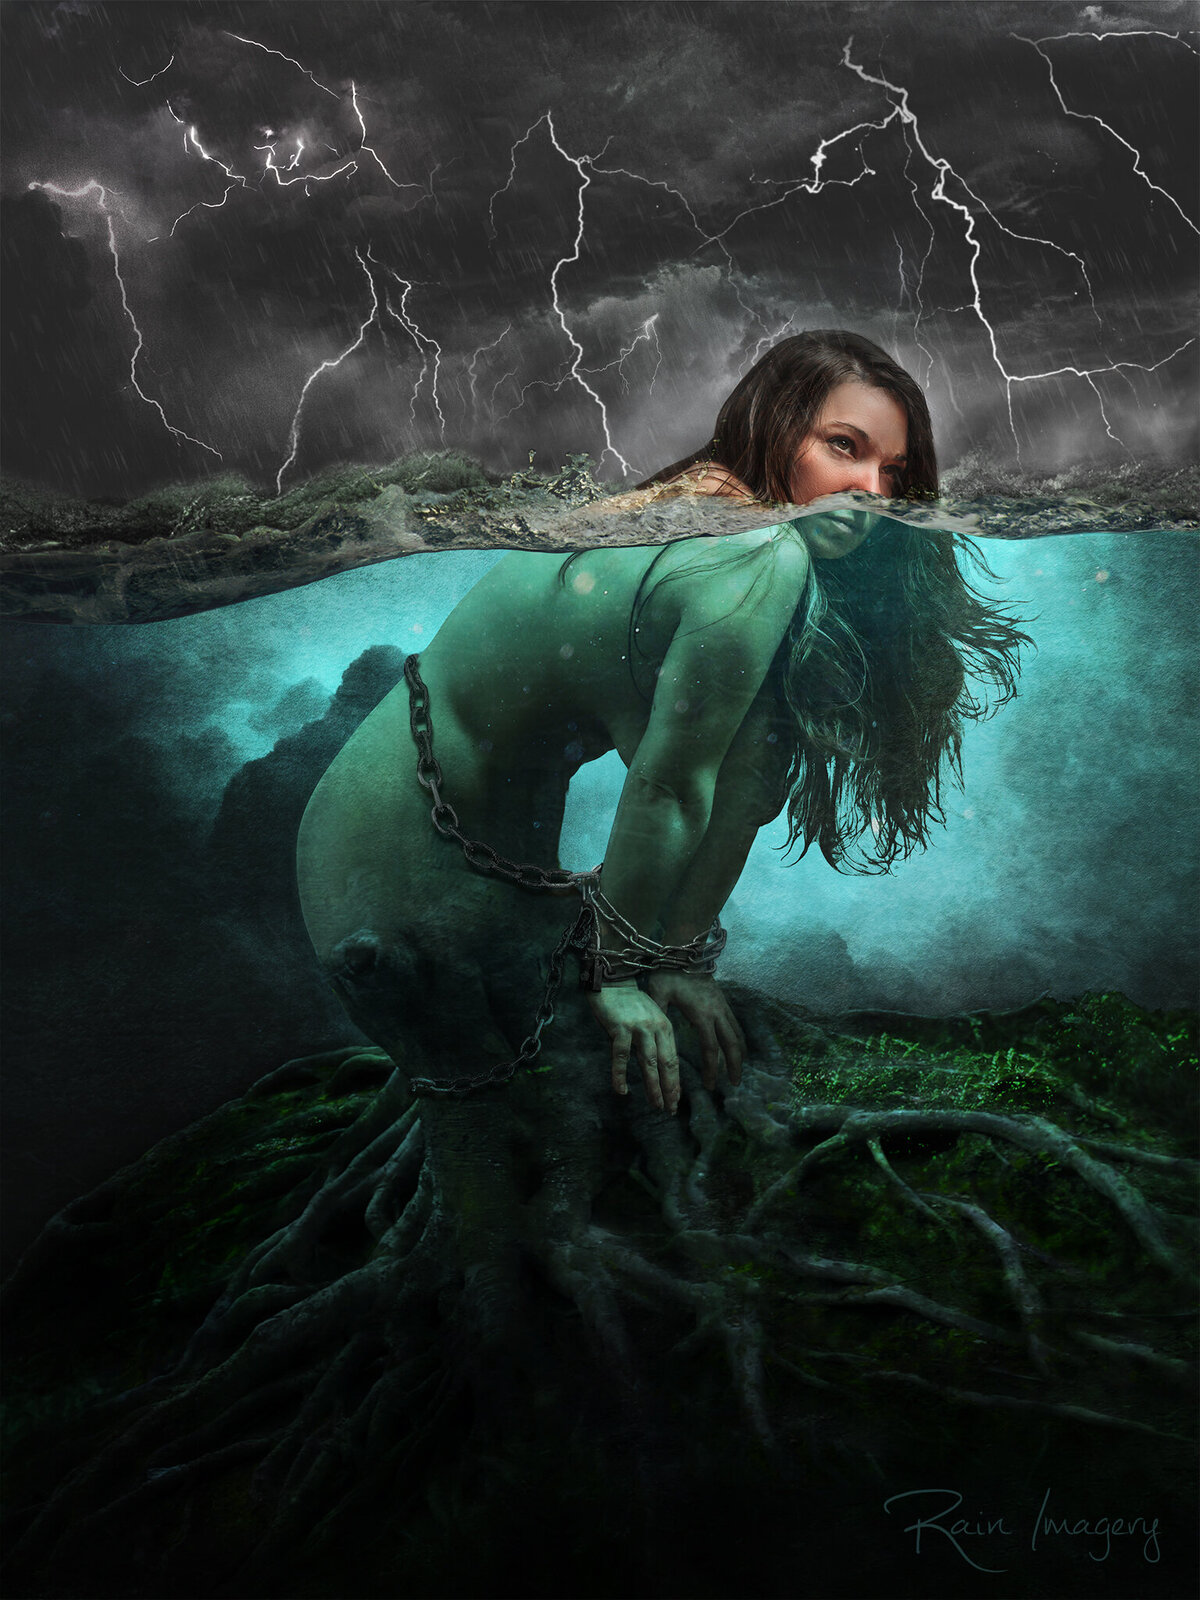 Fantasy photo art creation of a woman rooted and chained in stormy water